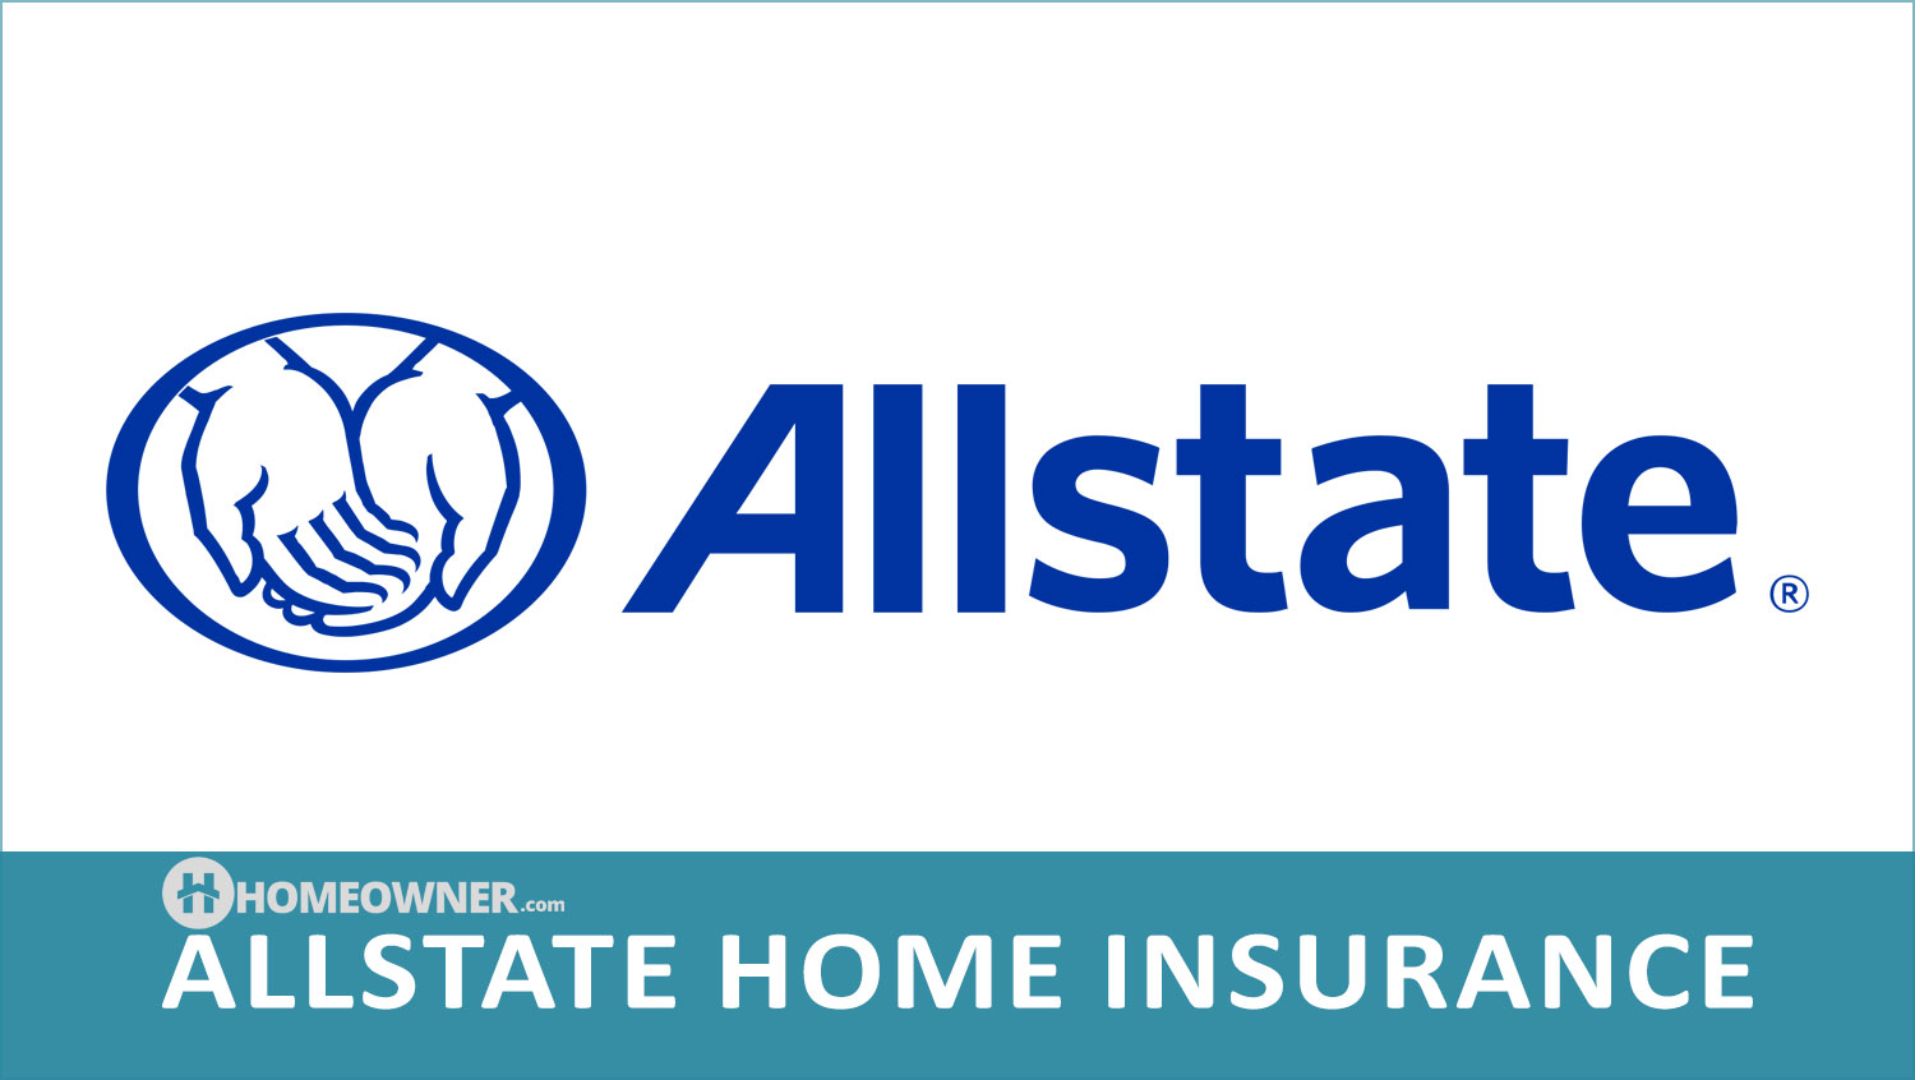 Allstate Considerations for Homeowners.